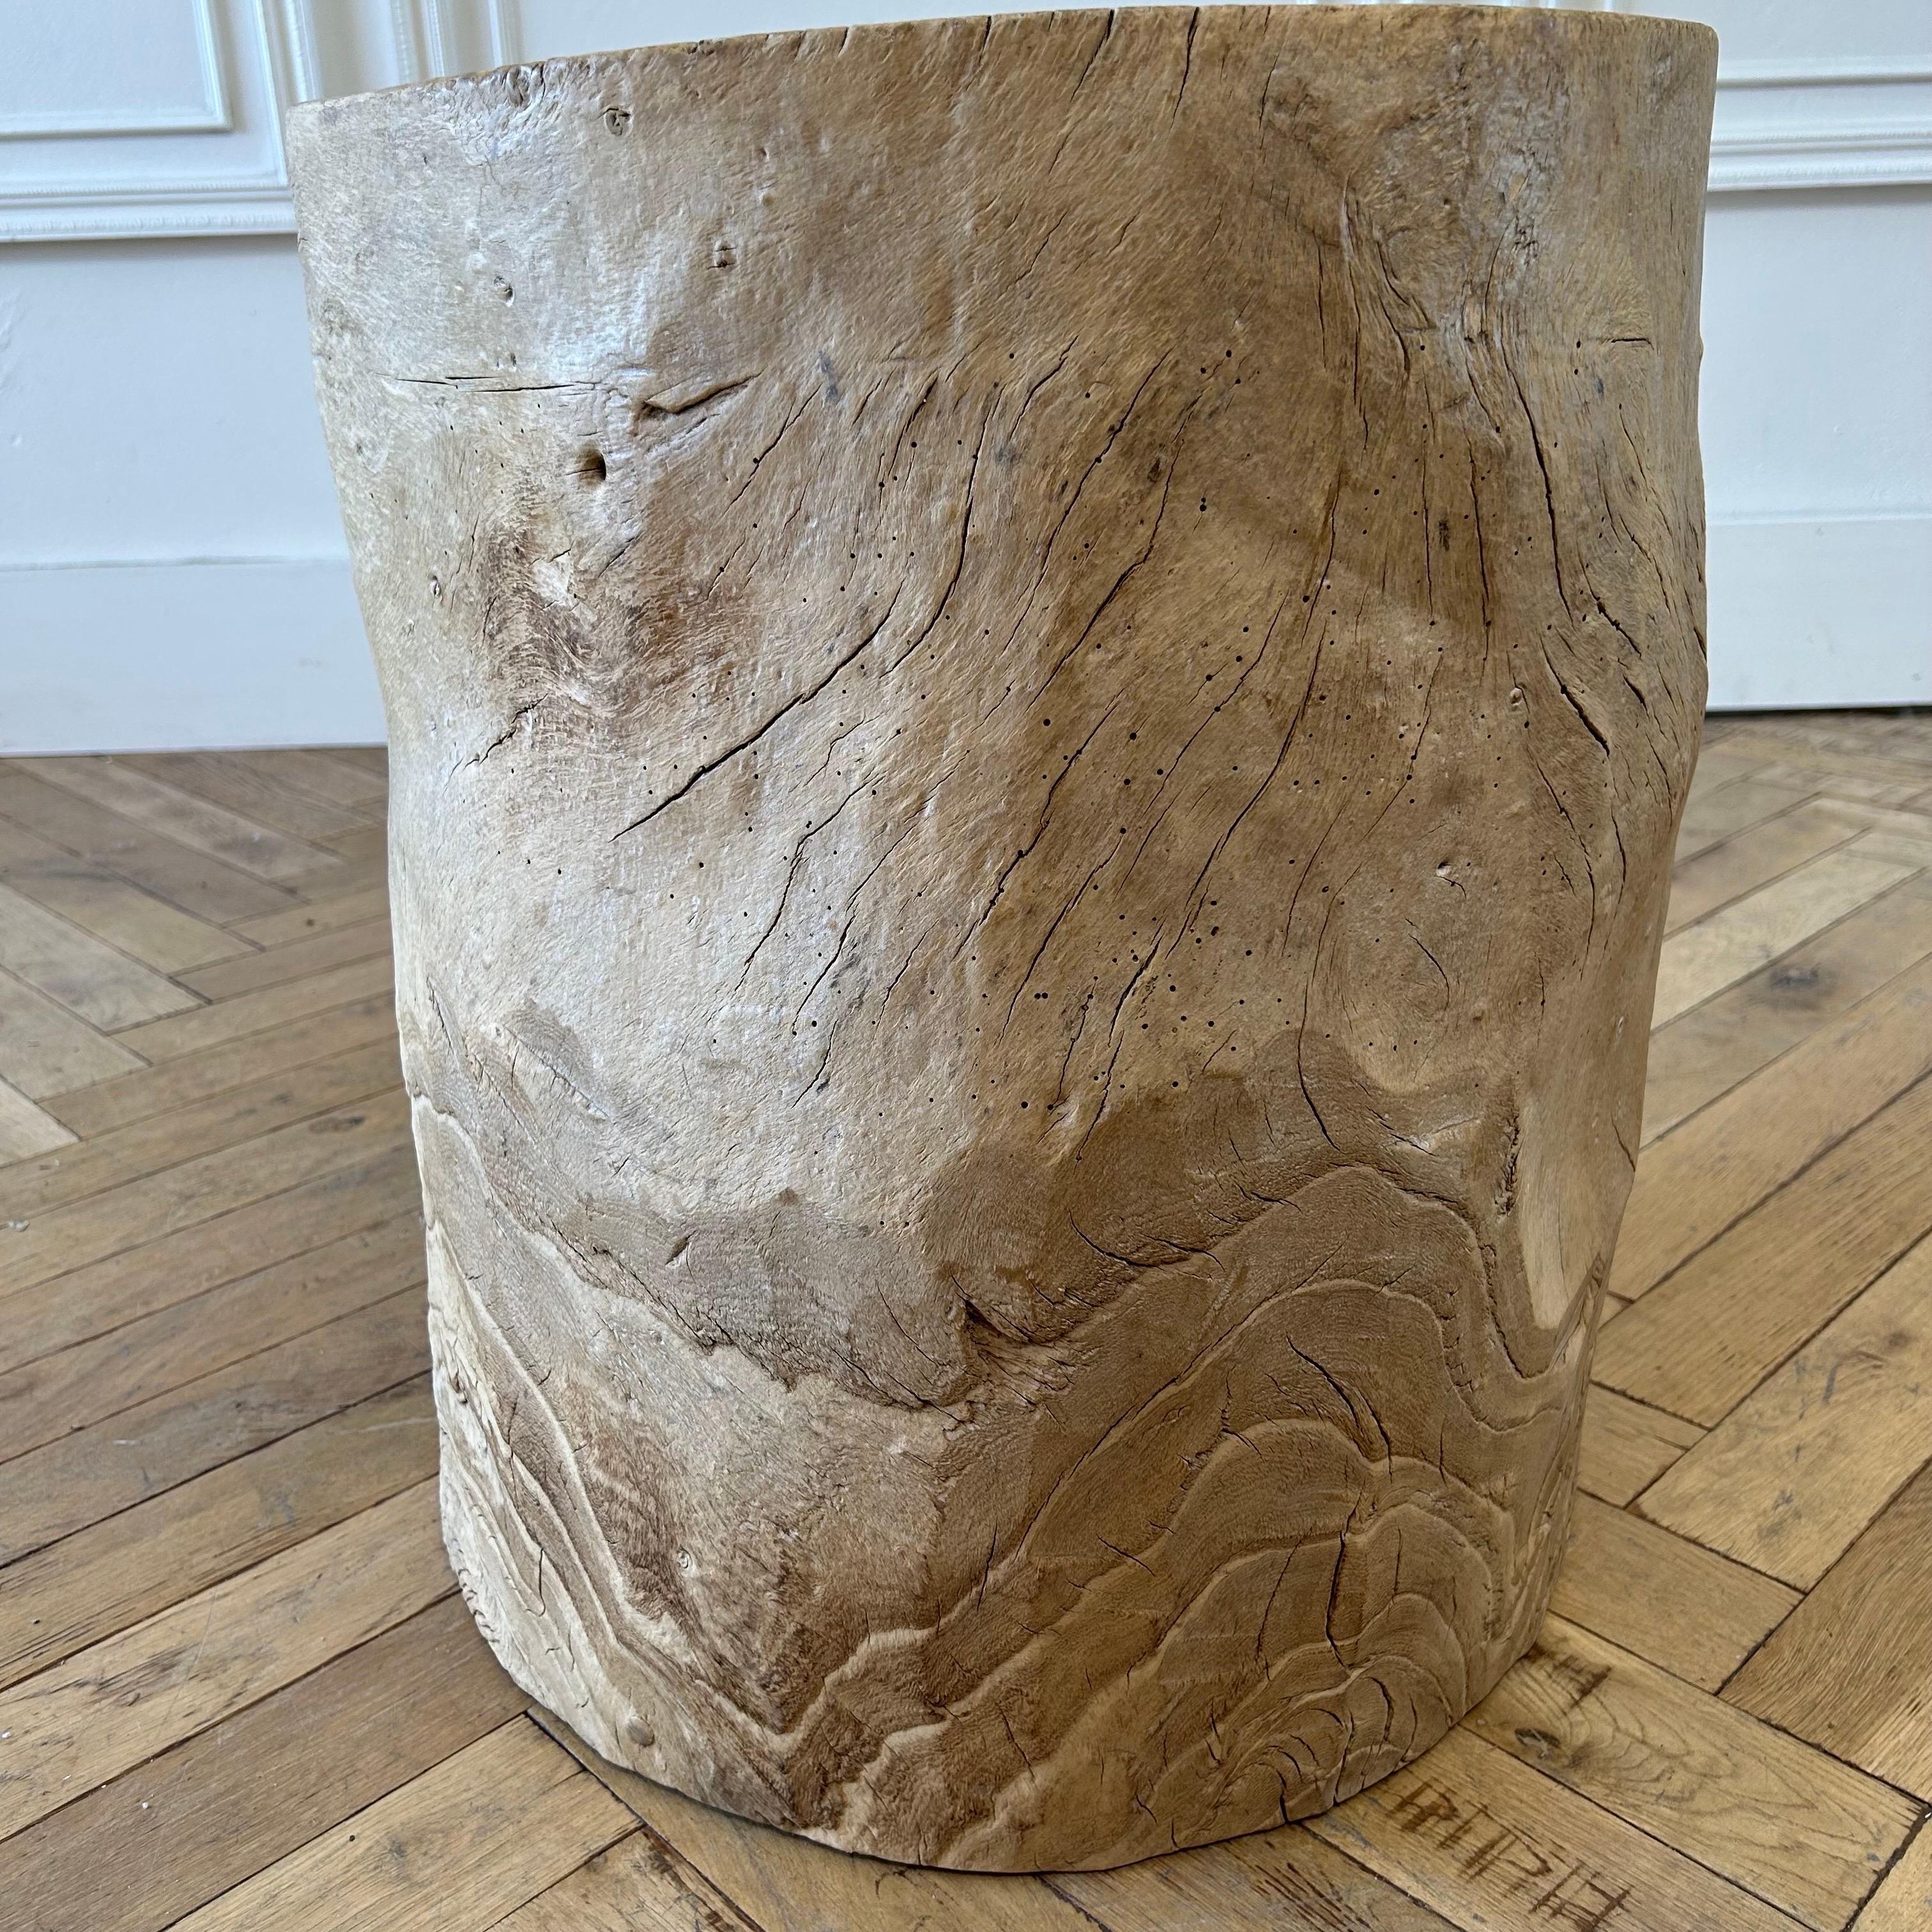 Large Carved Out Stump Decorative Planter 5